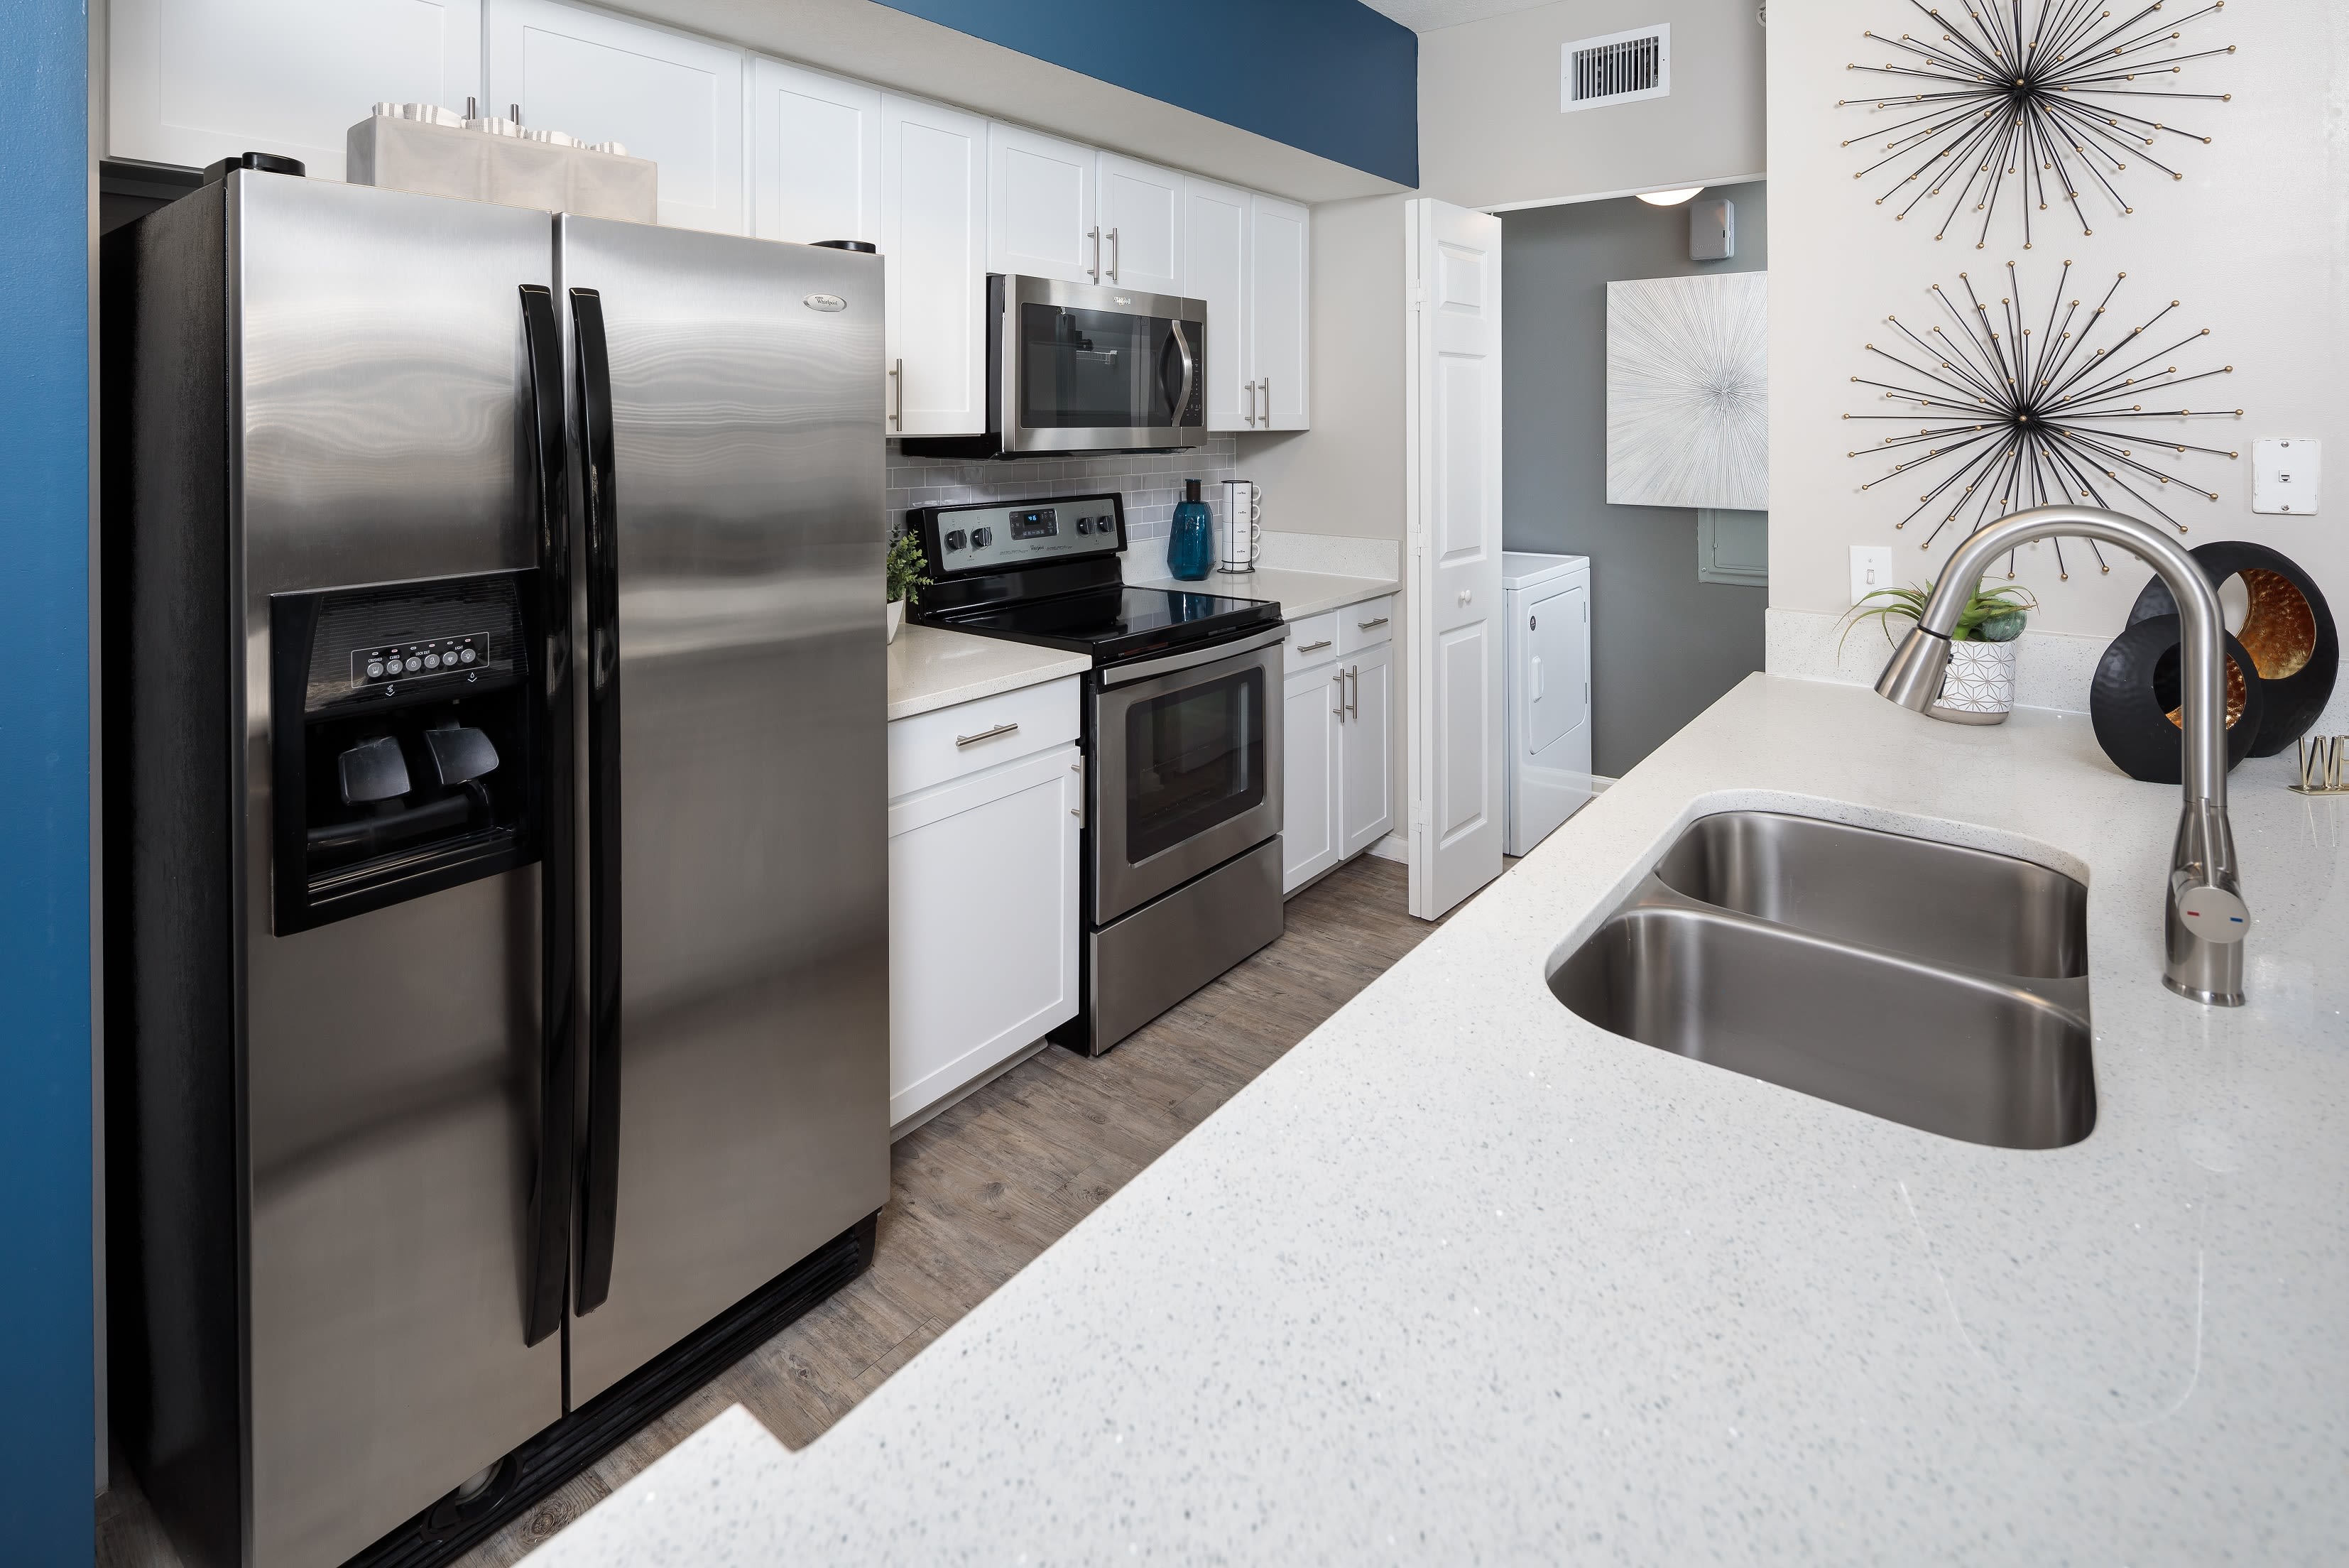 Sleek white cabinets and stainless steel appliances in the kitchen at The Pearl in Ft Lauderdale, Florida